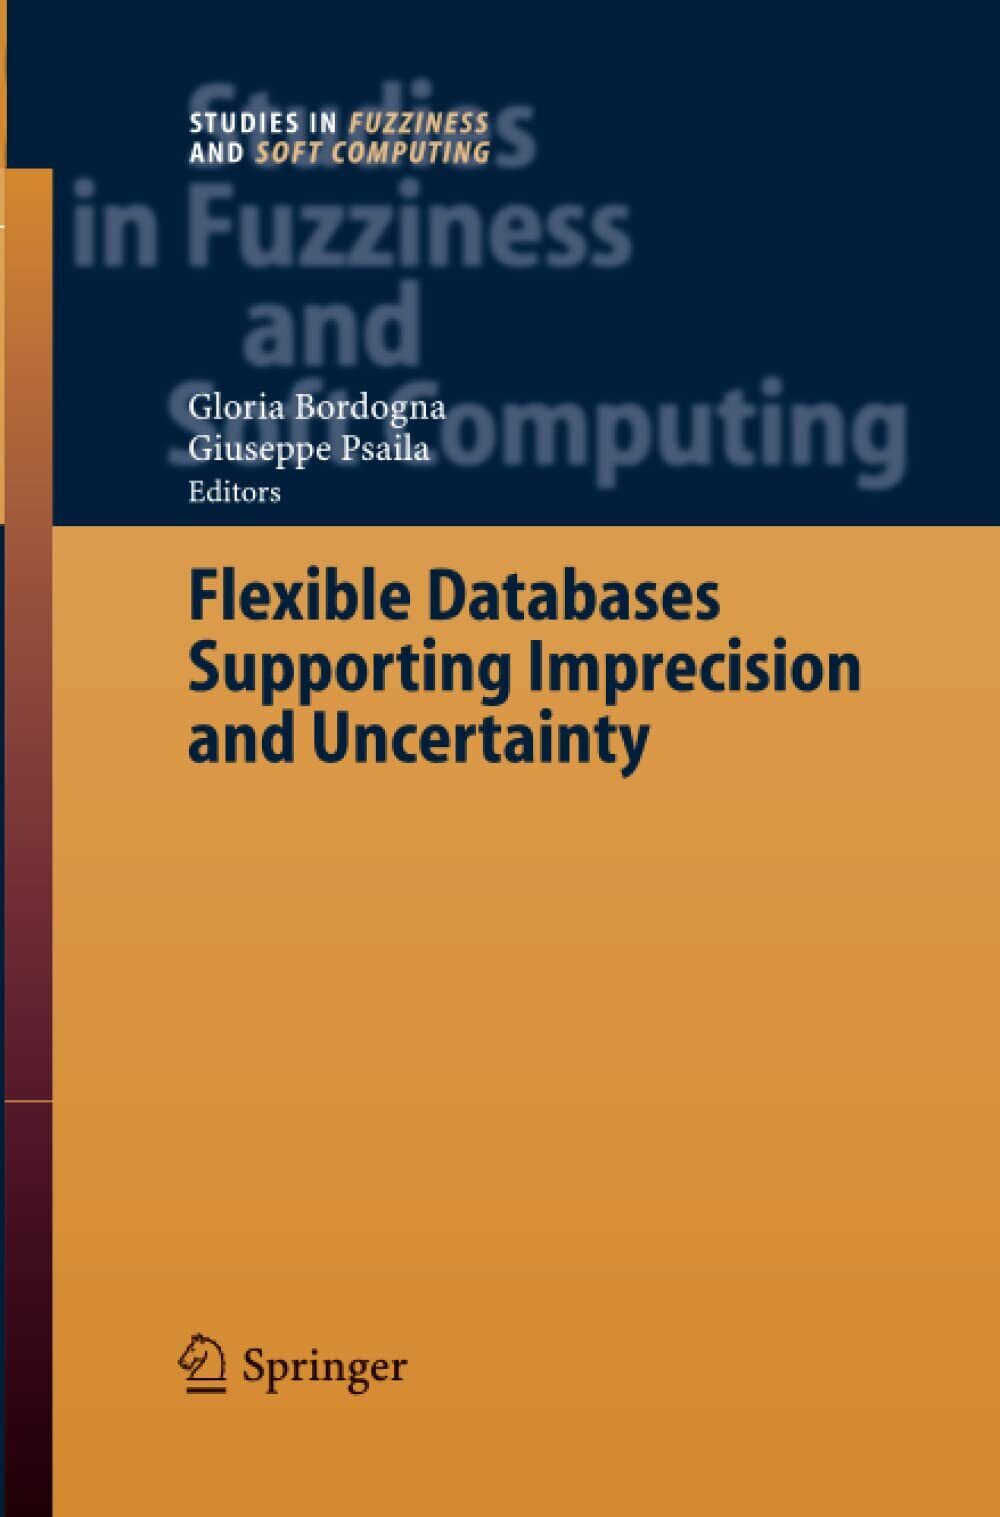 Flexible Databases Supporting Imprecision and Uncertainty -Gloria Bordogna, 2014